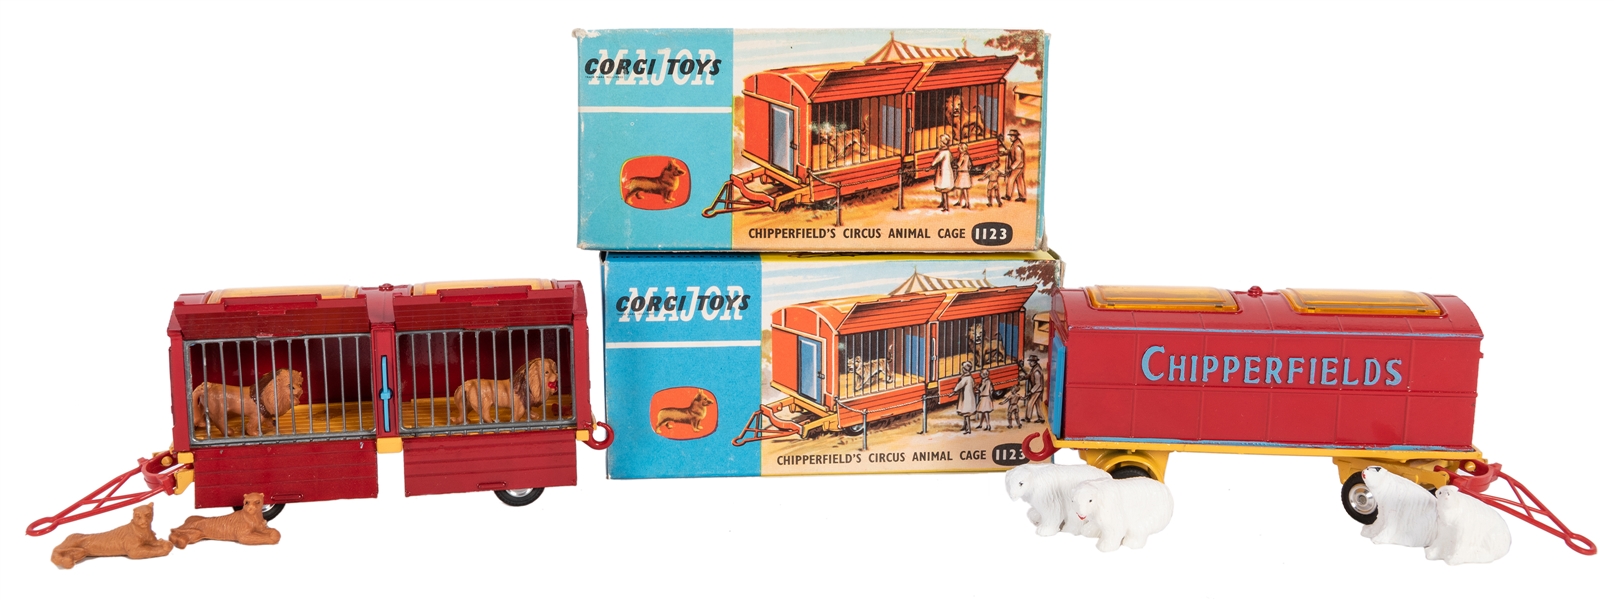  Lot of 2 Corgi Chipperfields Circus Animal Cages #1123 in Original Boxes. 1961.